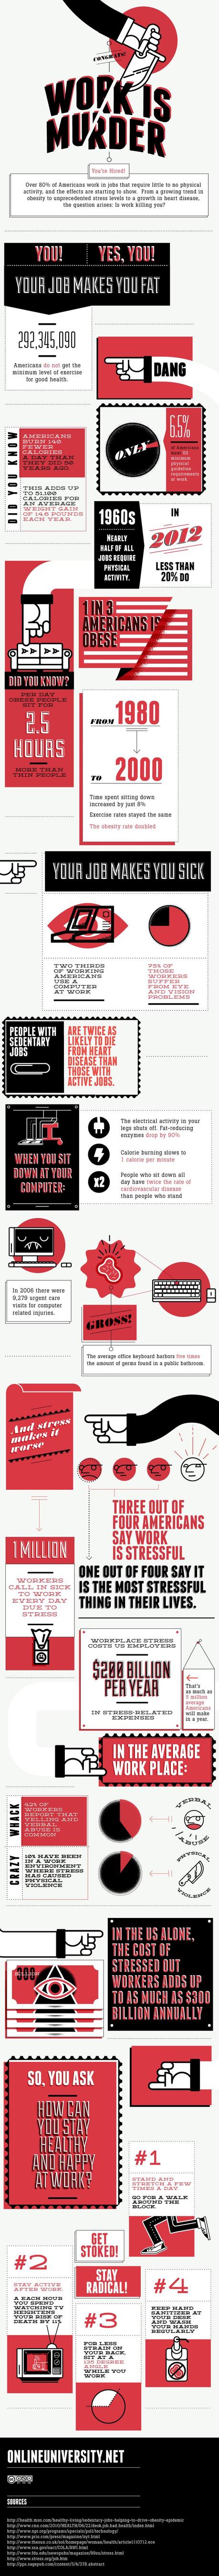 work is murder infographie gnd geek Infographie   Comment le travail vous tuera infographies  geek gnd geekndev